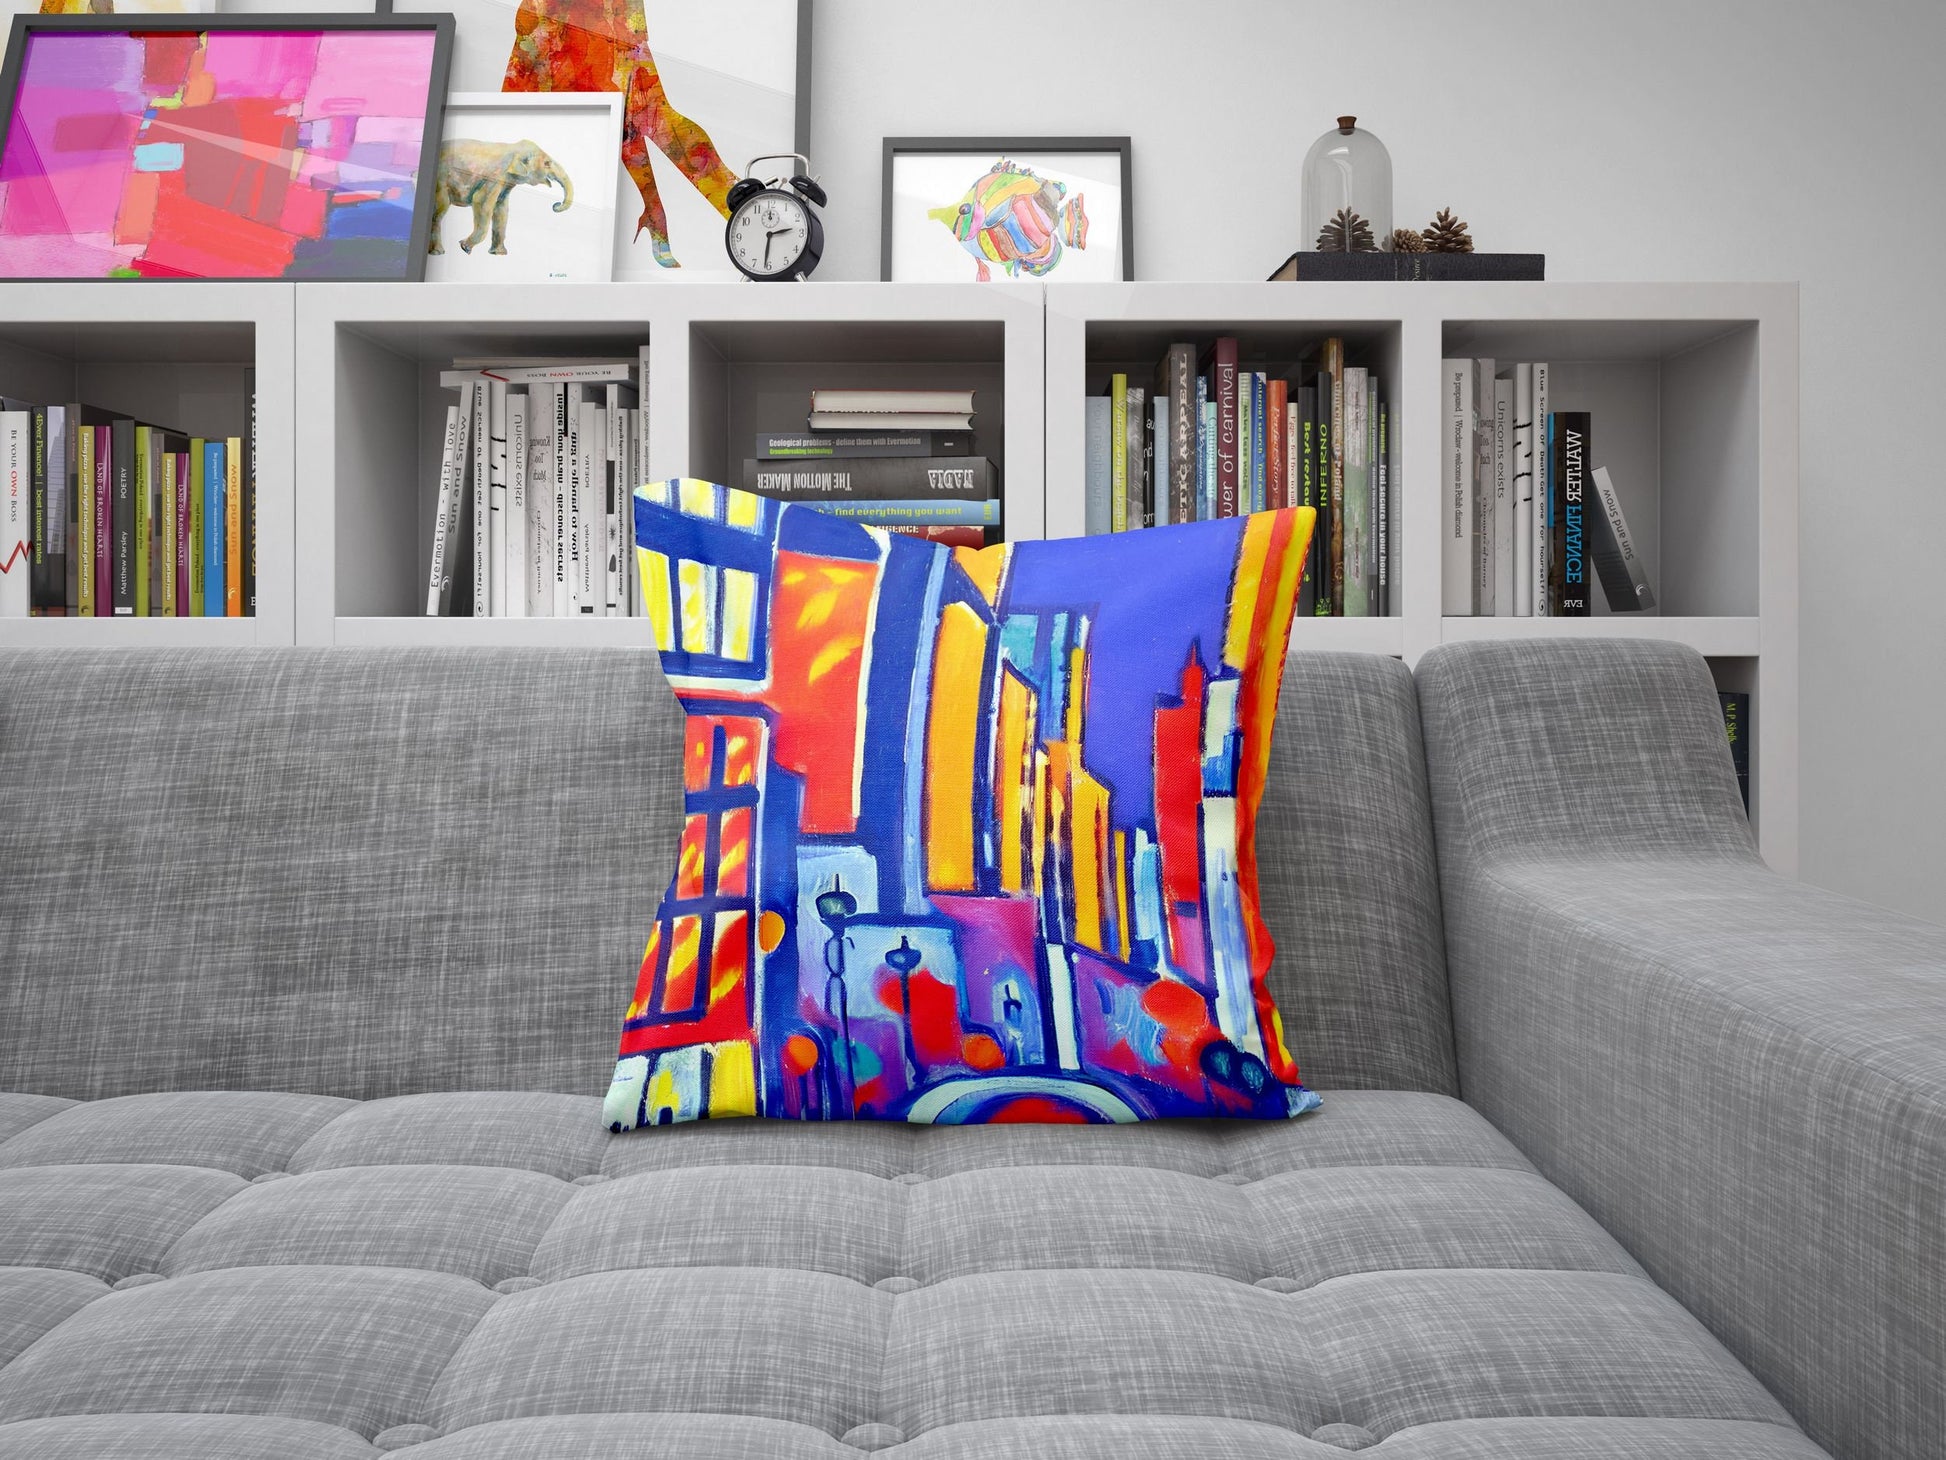 Chicago At Night, Toss Pillow, Cat Pillow, Artist Pillow, Colorful Pillow Case, Modern Pillow, 20X20 Pillow Cover, Home And Living